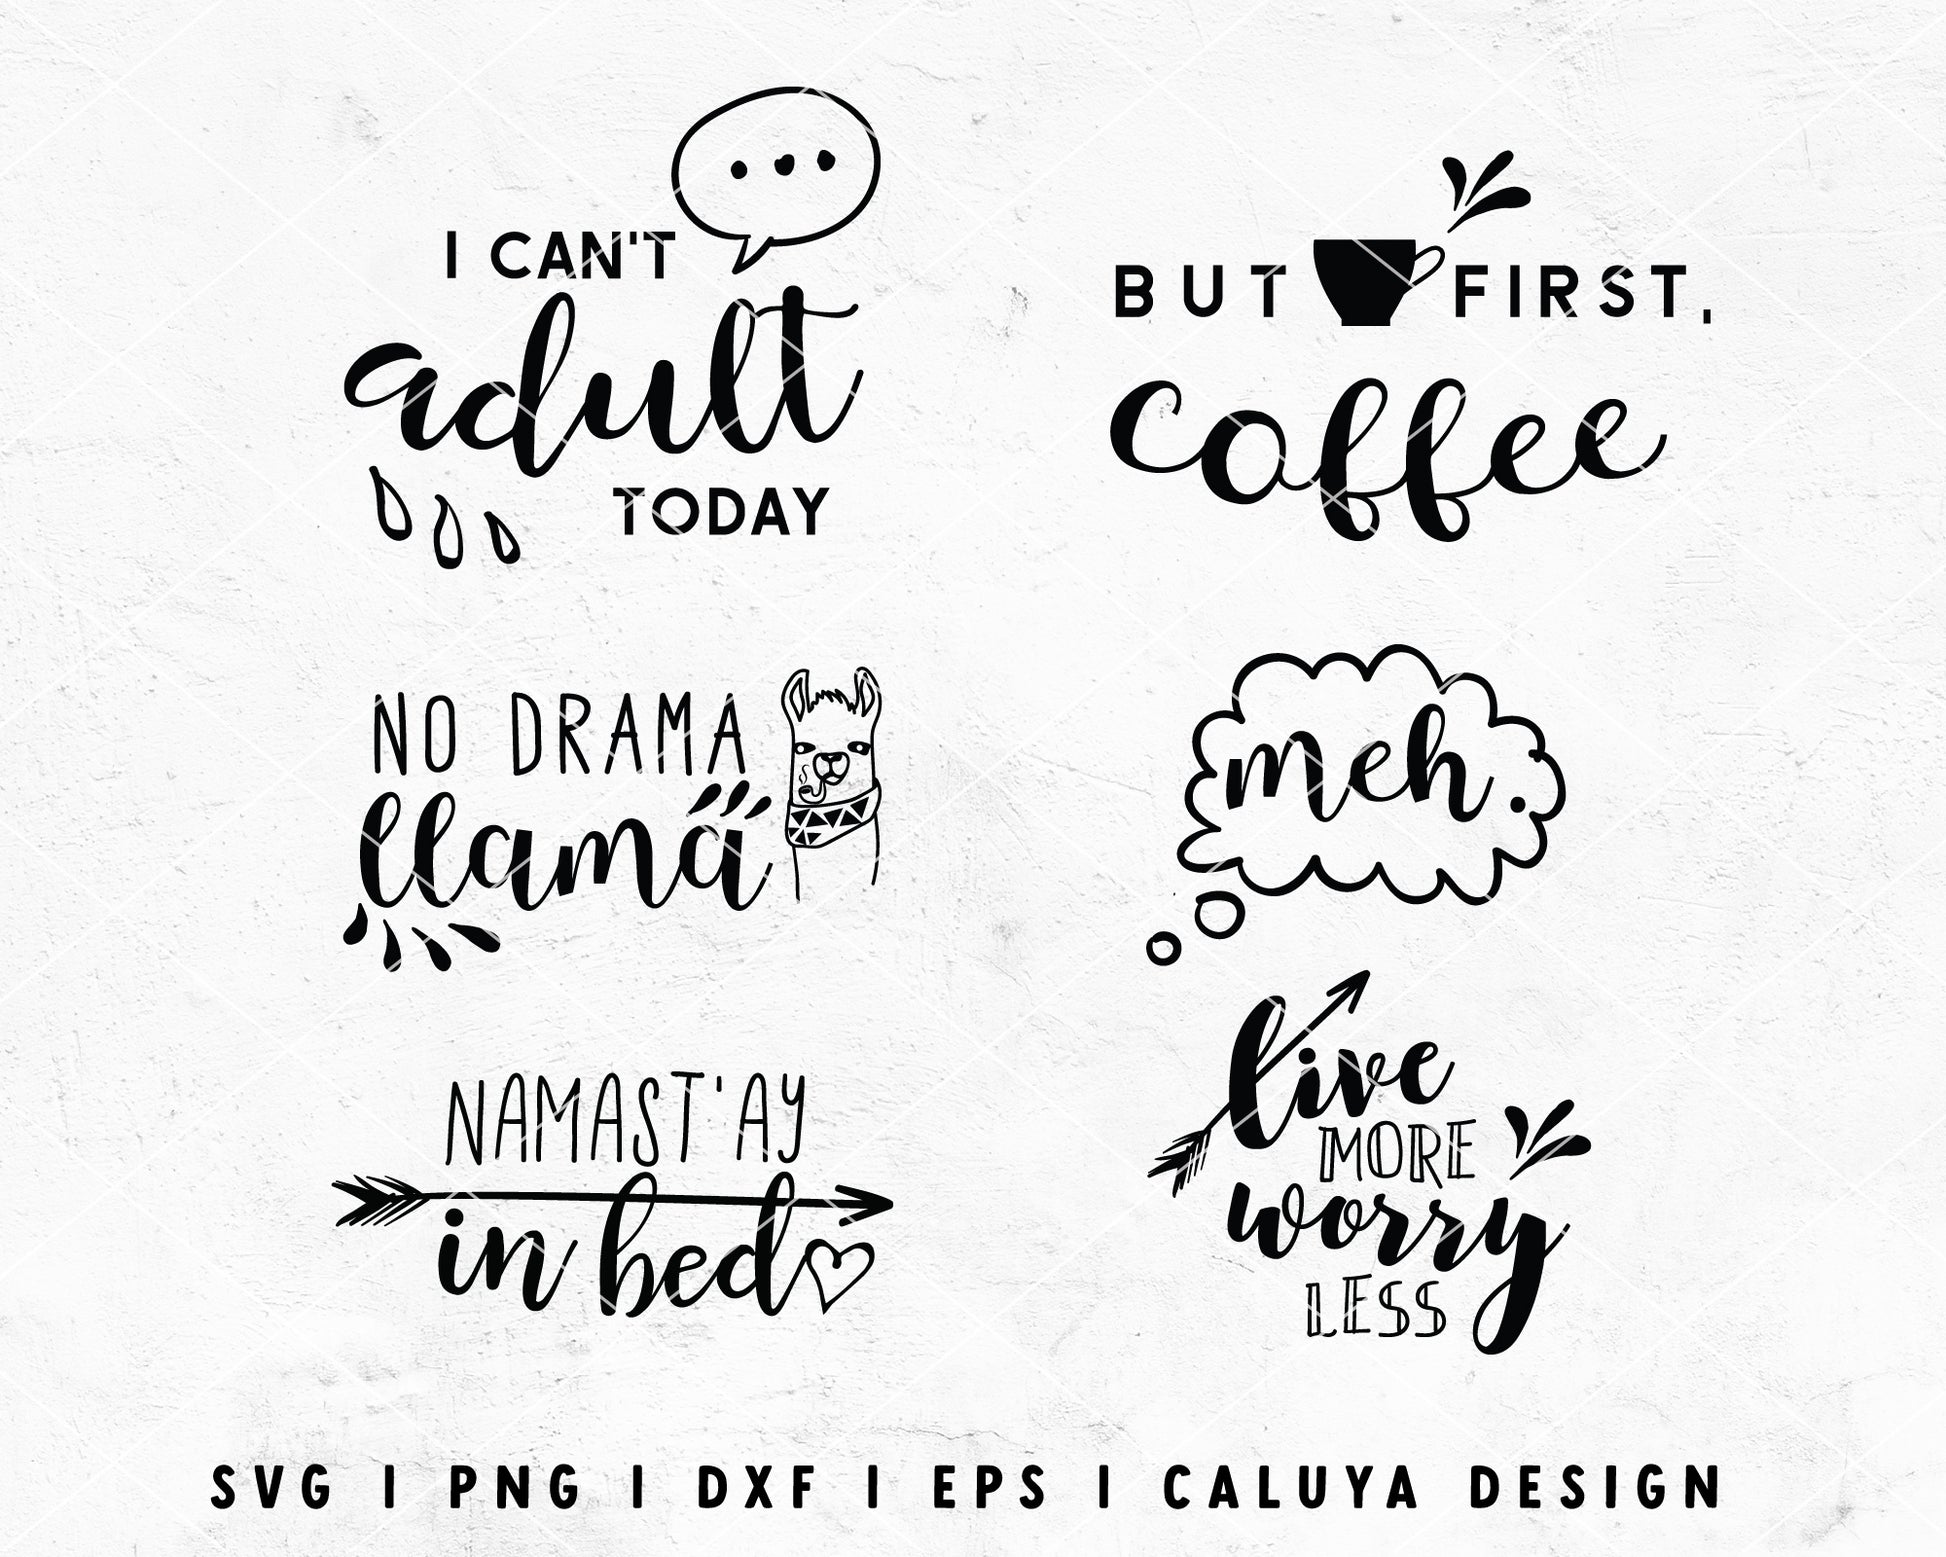 FREE Funny Quote SVG | Humorous Quote SVG Cut File for Cricut, Cameo Silhouette | Free SVG Cut File